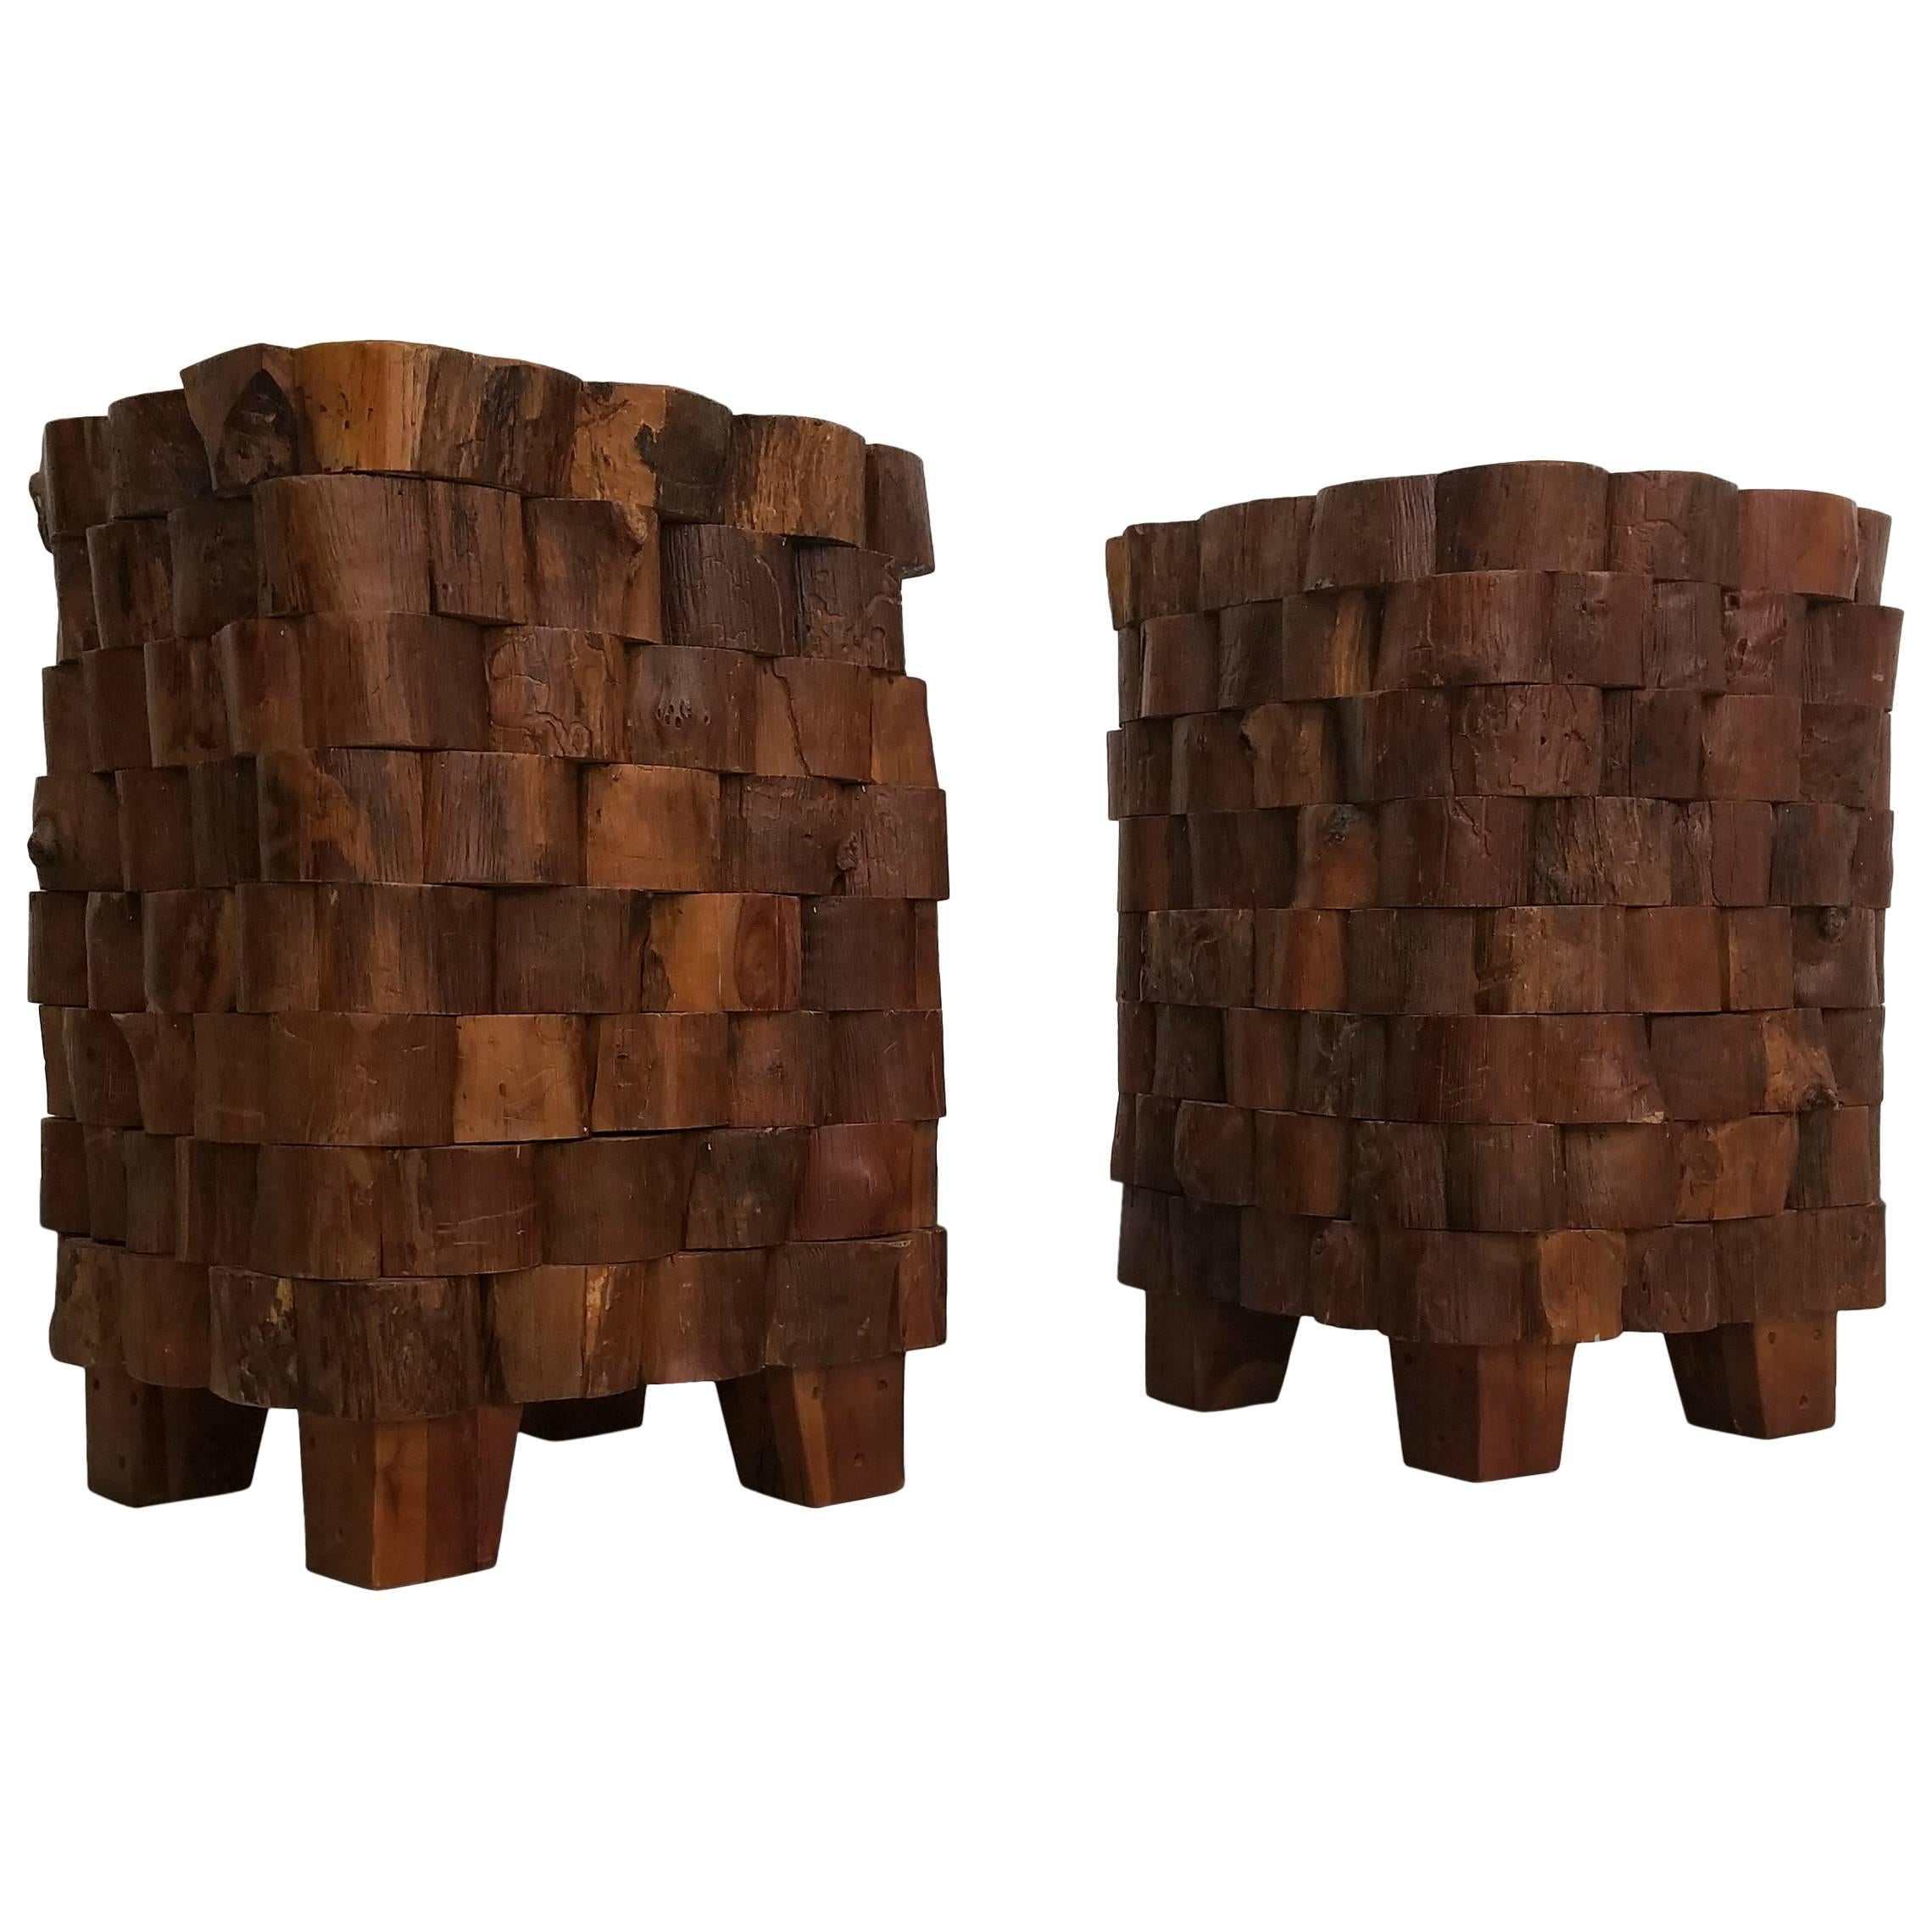 Pair of Stacked Wood End Cut Live Edge Brutalist Style Primitive Side Tables